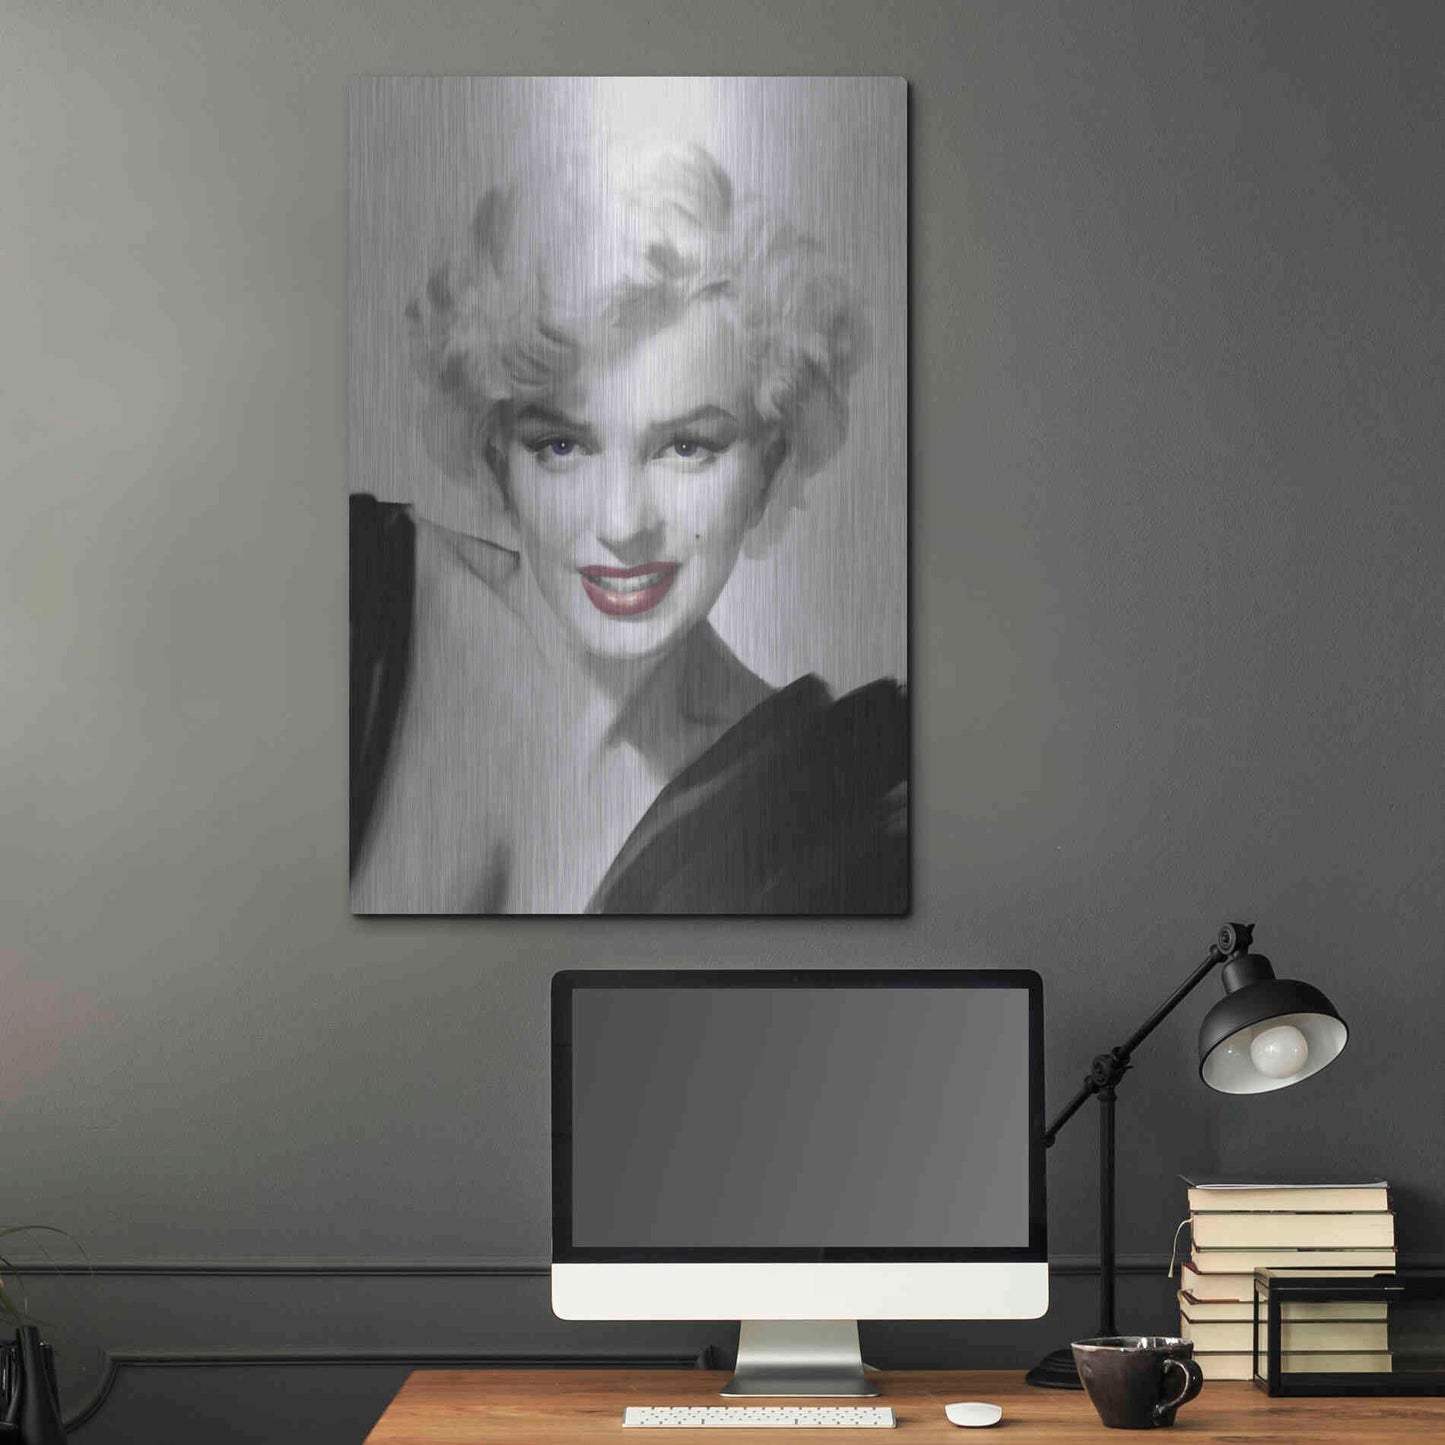 Luxe Metal Art 'The Look Red Lips' by Chris Consani, Metal Wall Art,24x36